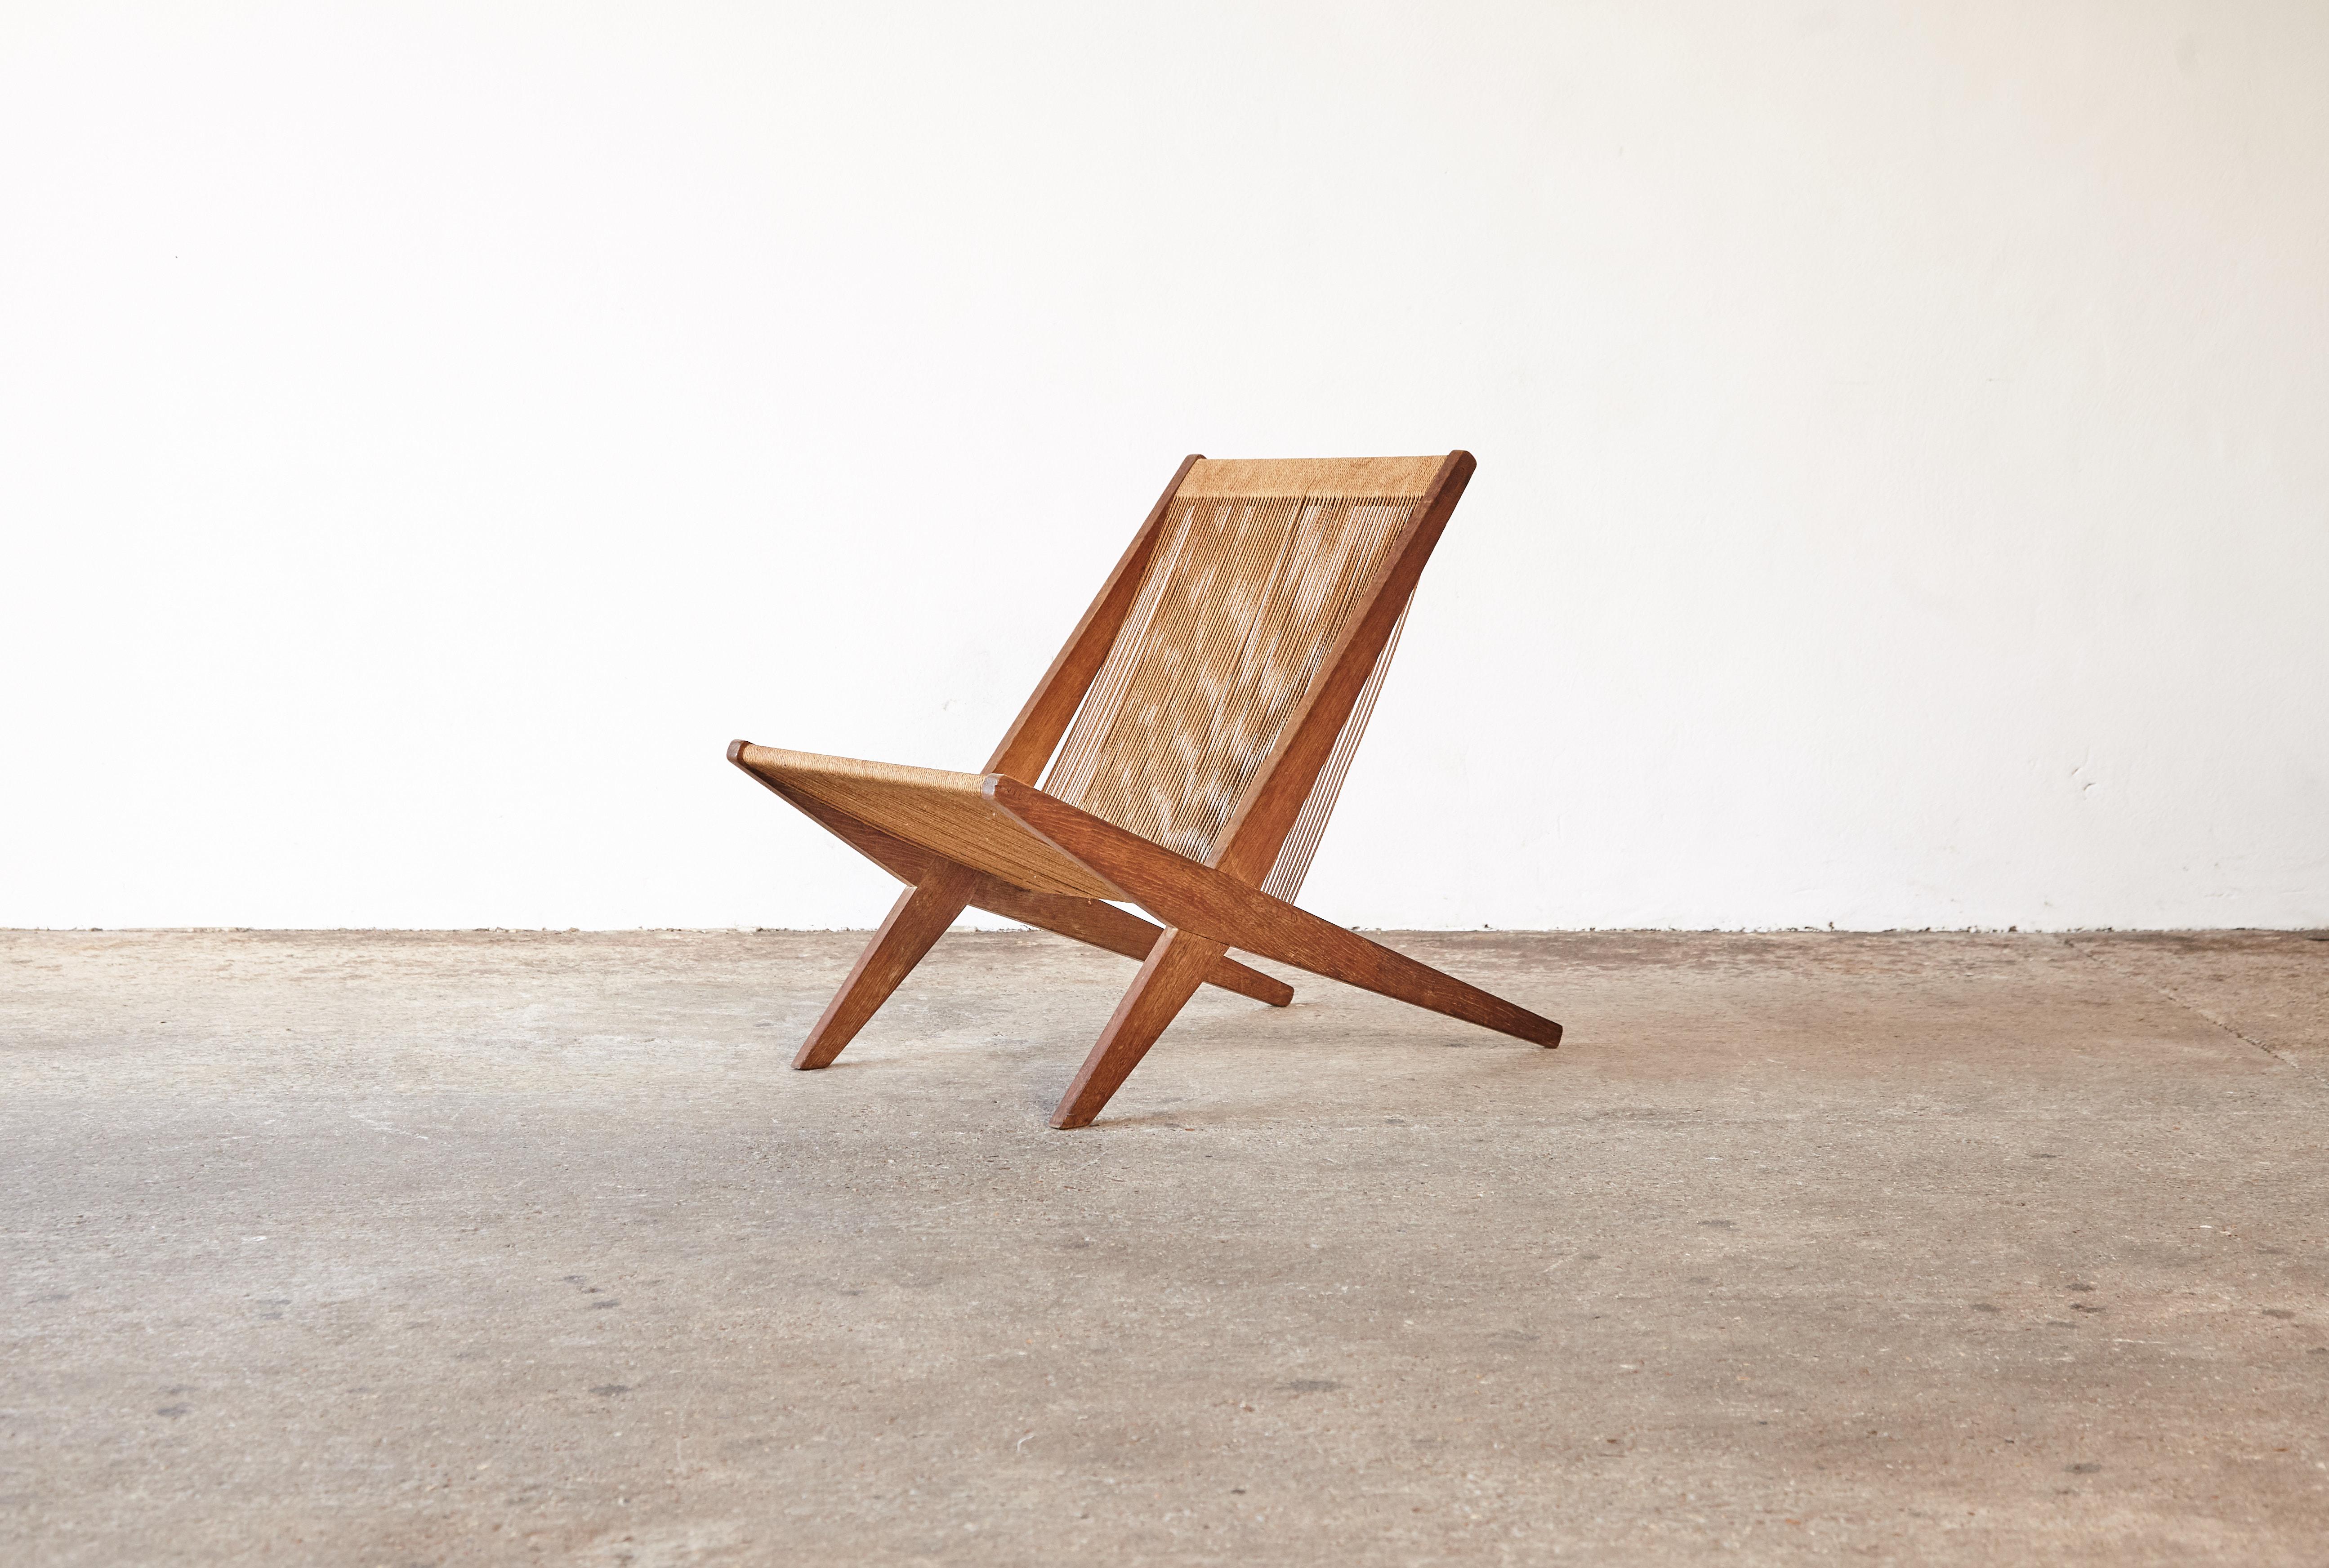 Oak and rope chair attributed to Poul Kjaerholm & Jørgen Høj for Thorald Madsen Snedkeri, Denmark, circa 1950s. In good original condition with a nice natural patina.    Fast shipping worldwide.




UK customers please note:    displayed prices do